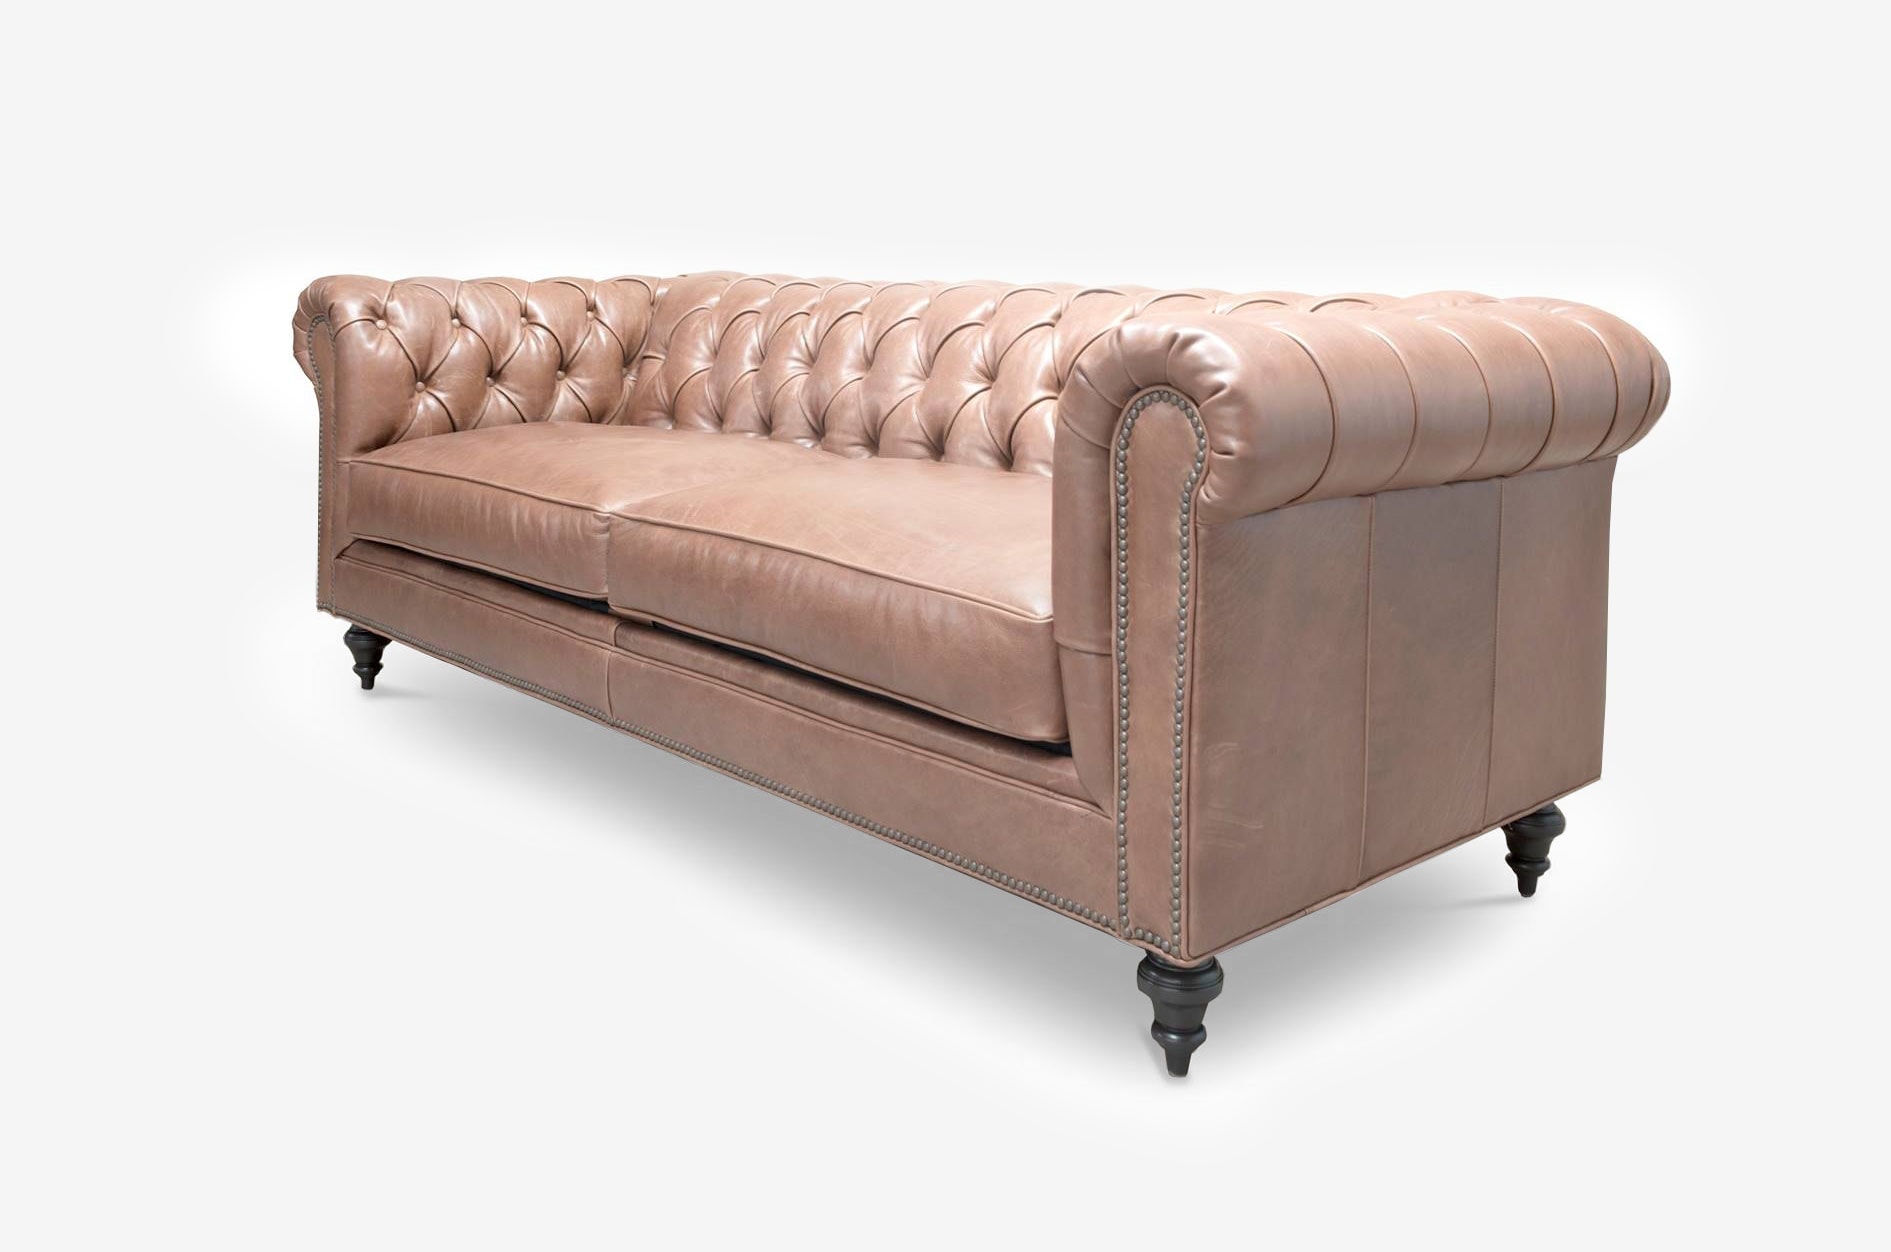 Fitzgerald Millennial Pink Leather Classic Chesterfield